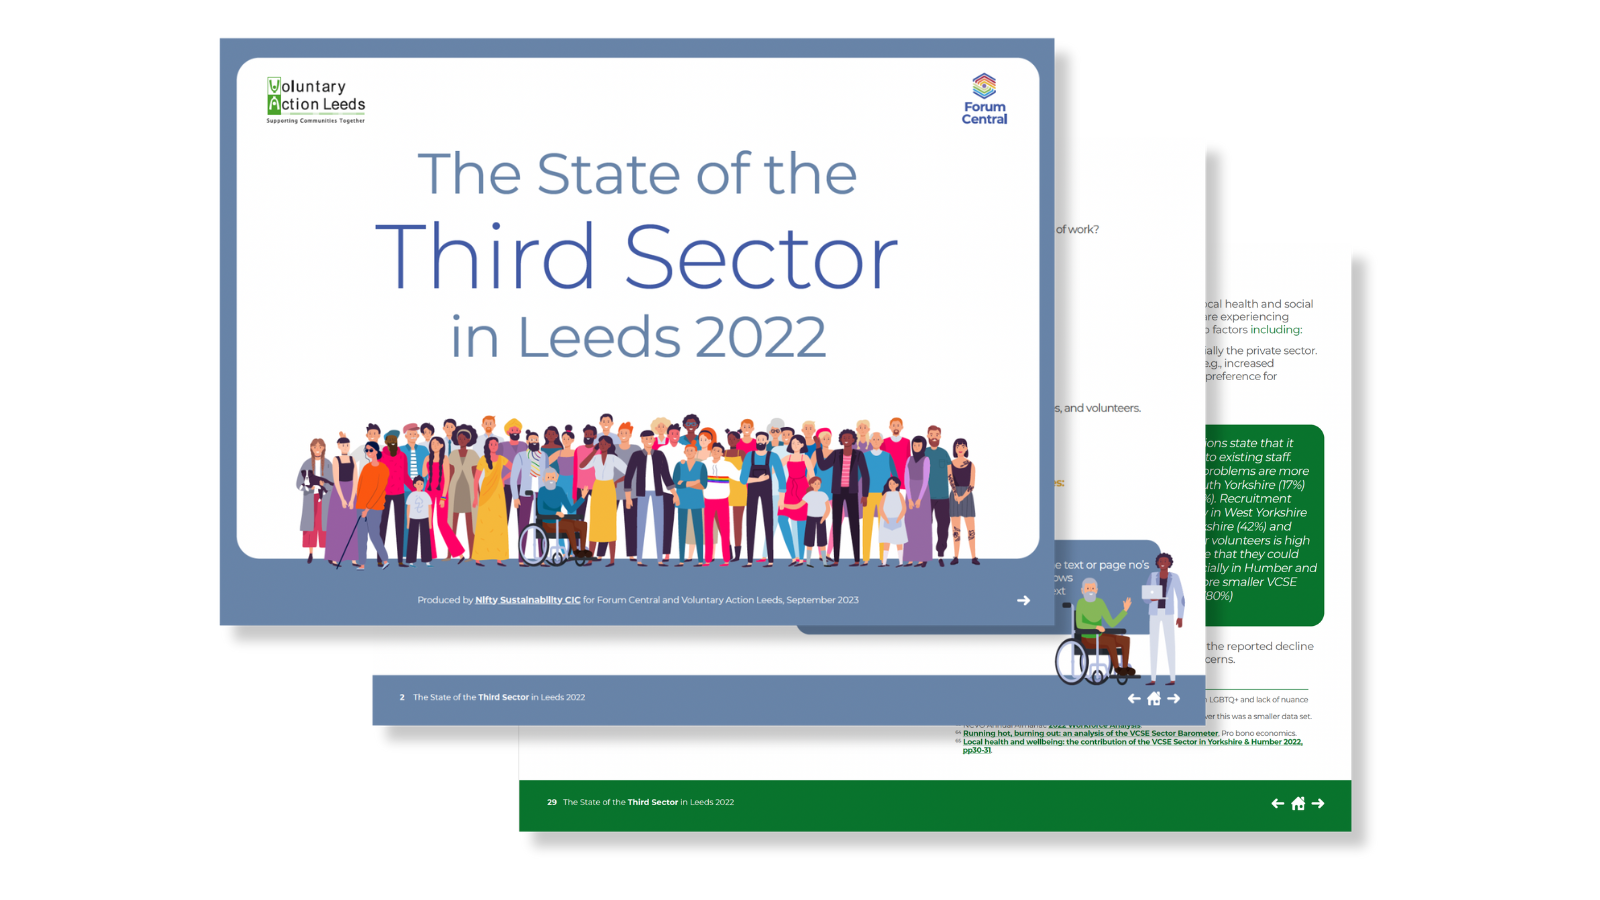 Graphic showing 3 pages of the report stacked with the front cover at the front which reads The State of the Third Sector in Leeds 2022 and has the Forum Central and Voluntary Action Leeds logos and a colourful illustration of a group of about 40 people of all different ages, shapes, sizes and skin colours.